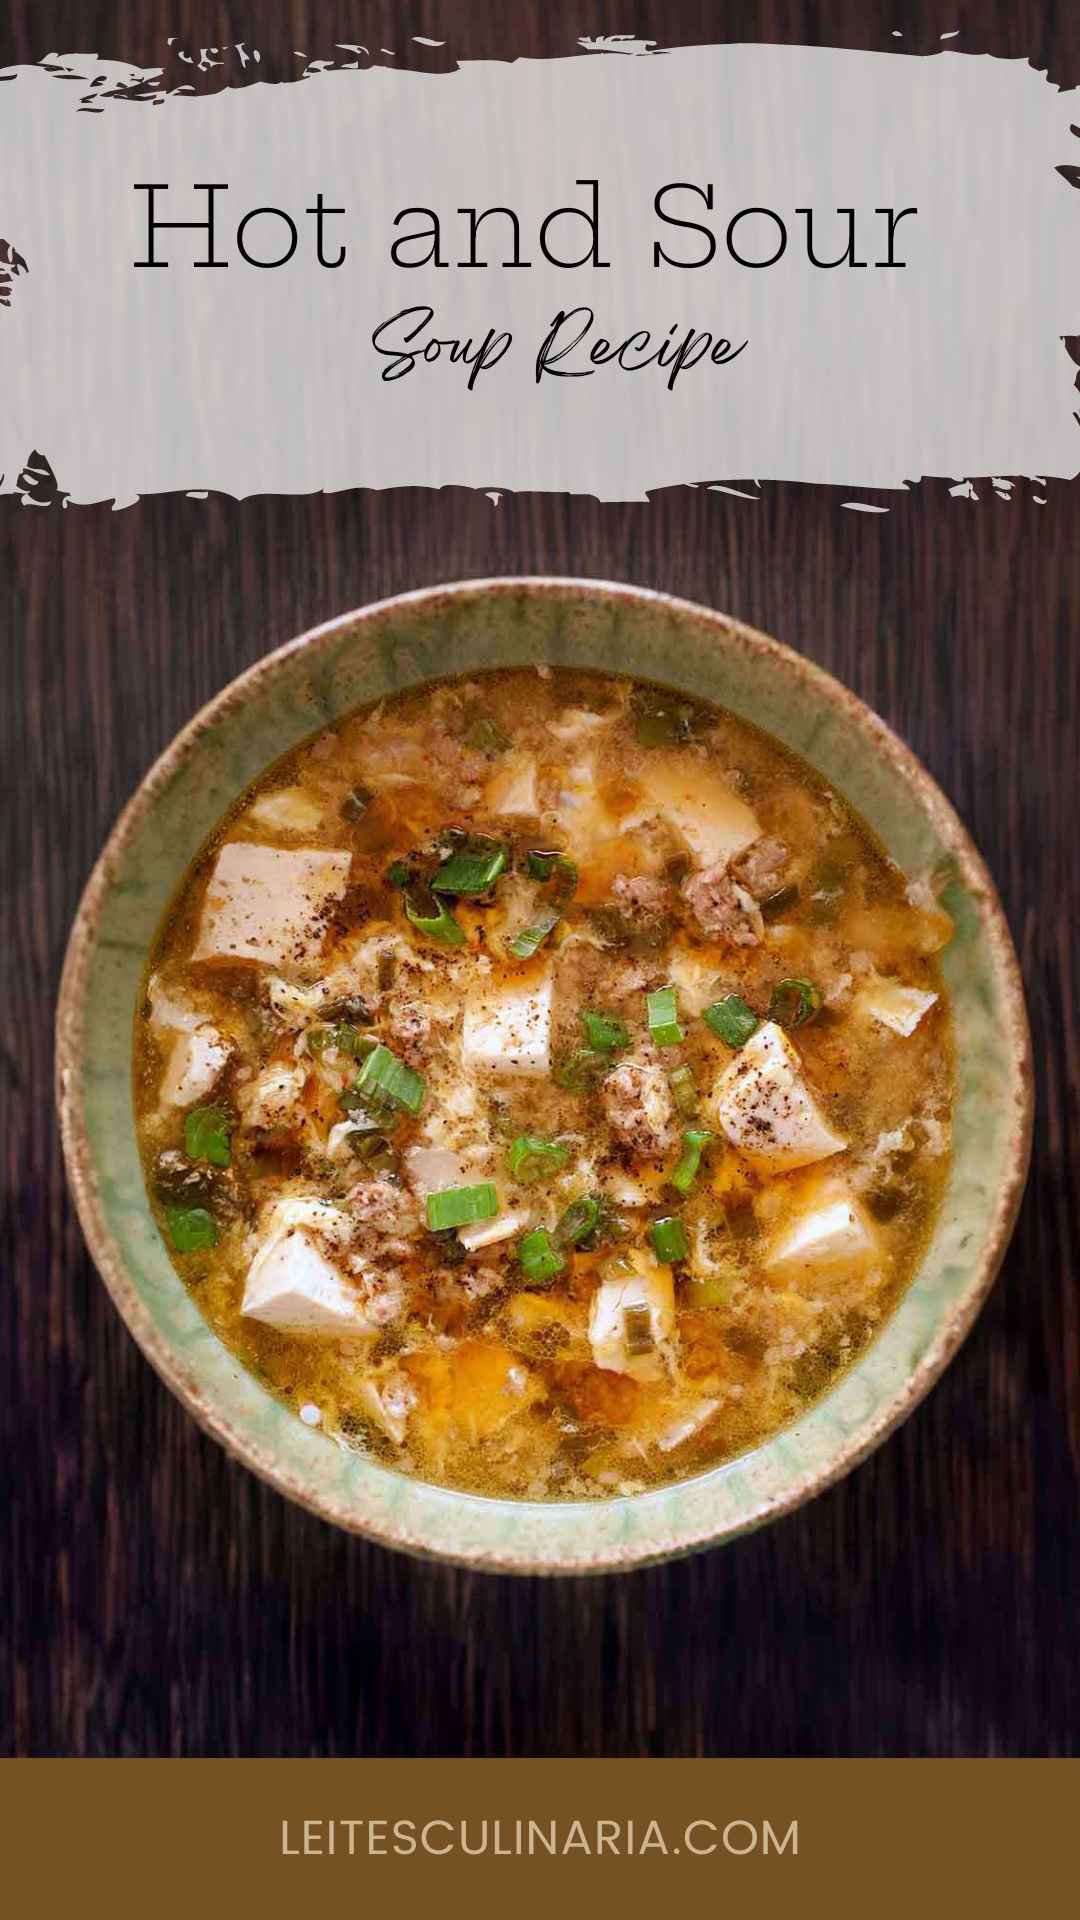 A bowl of hot and sour soup with tofu cubes and ground pork, topped with sliced scallions.